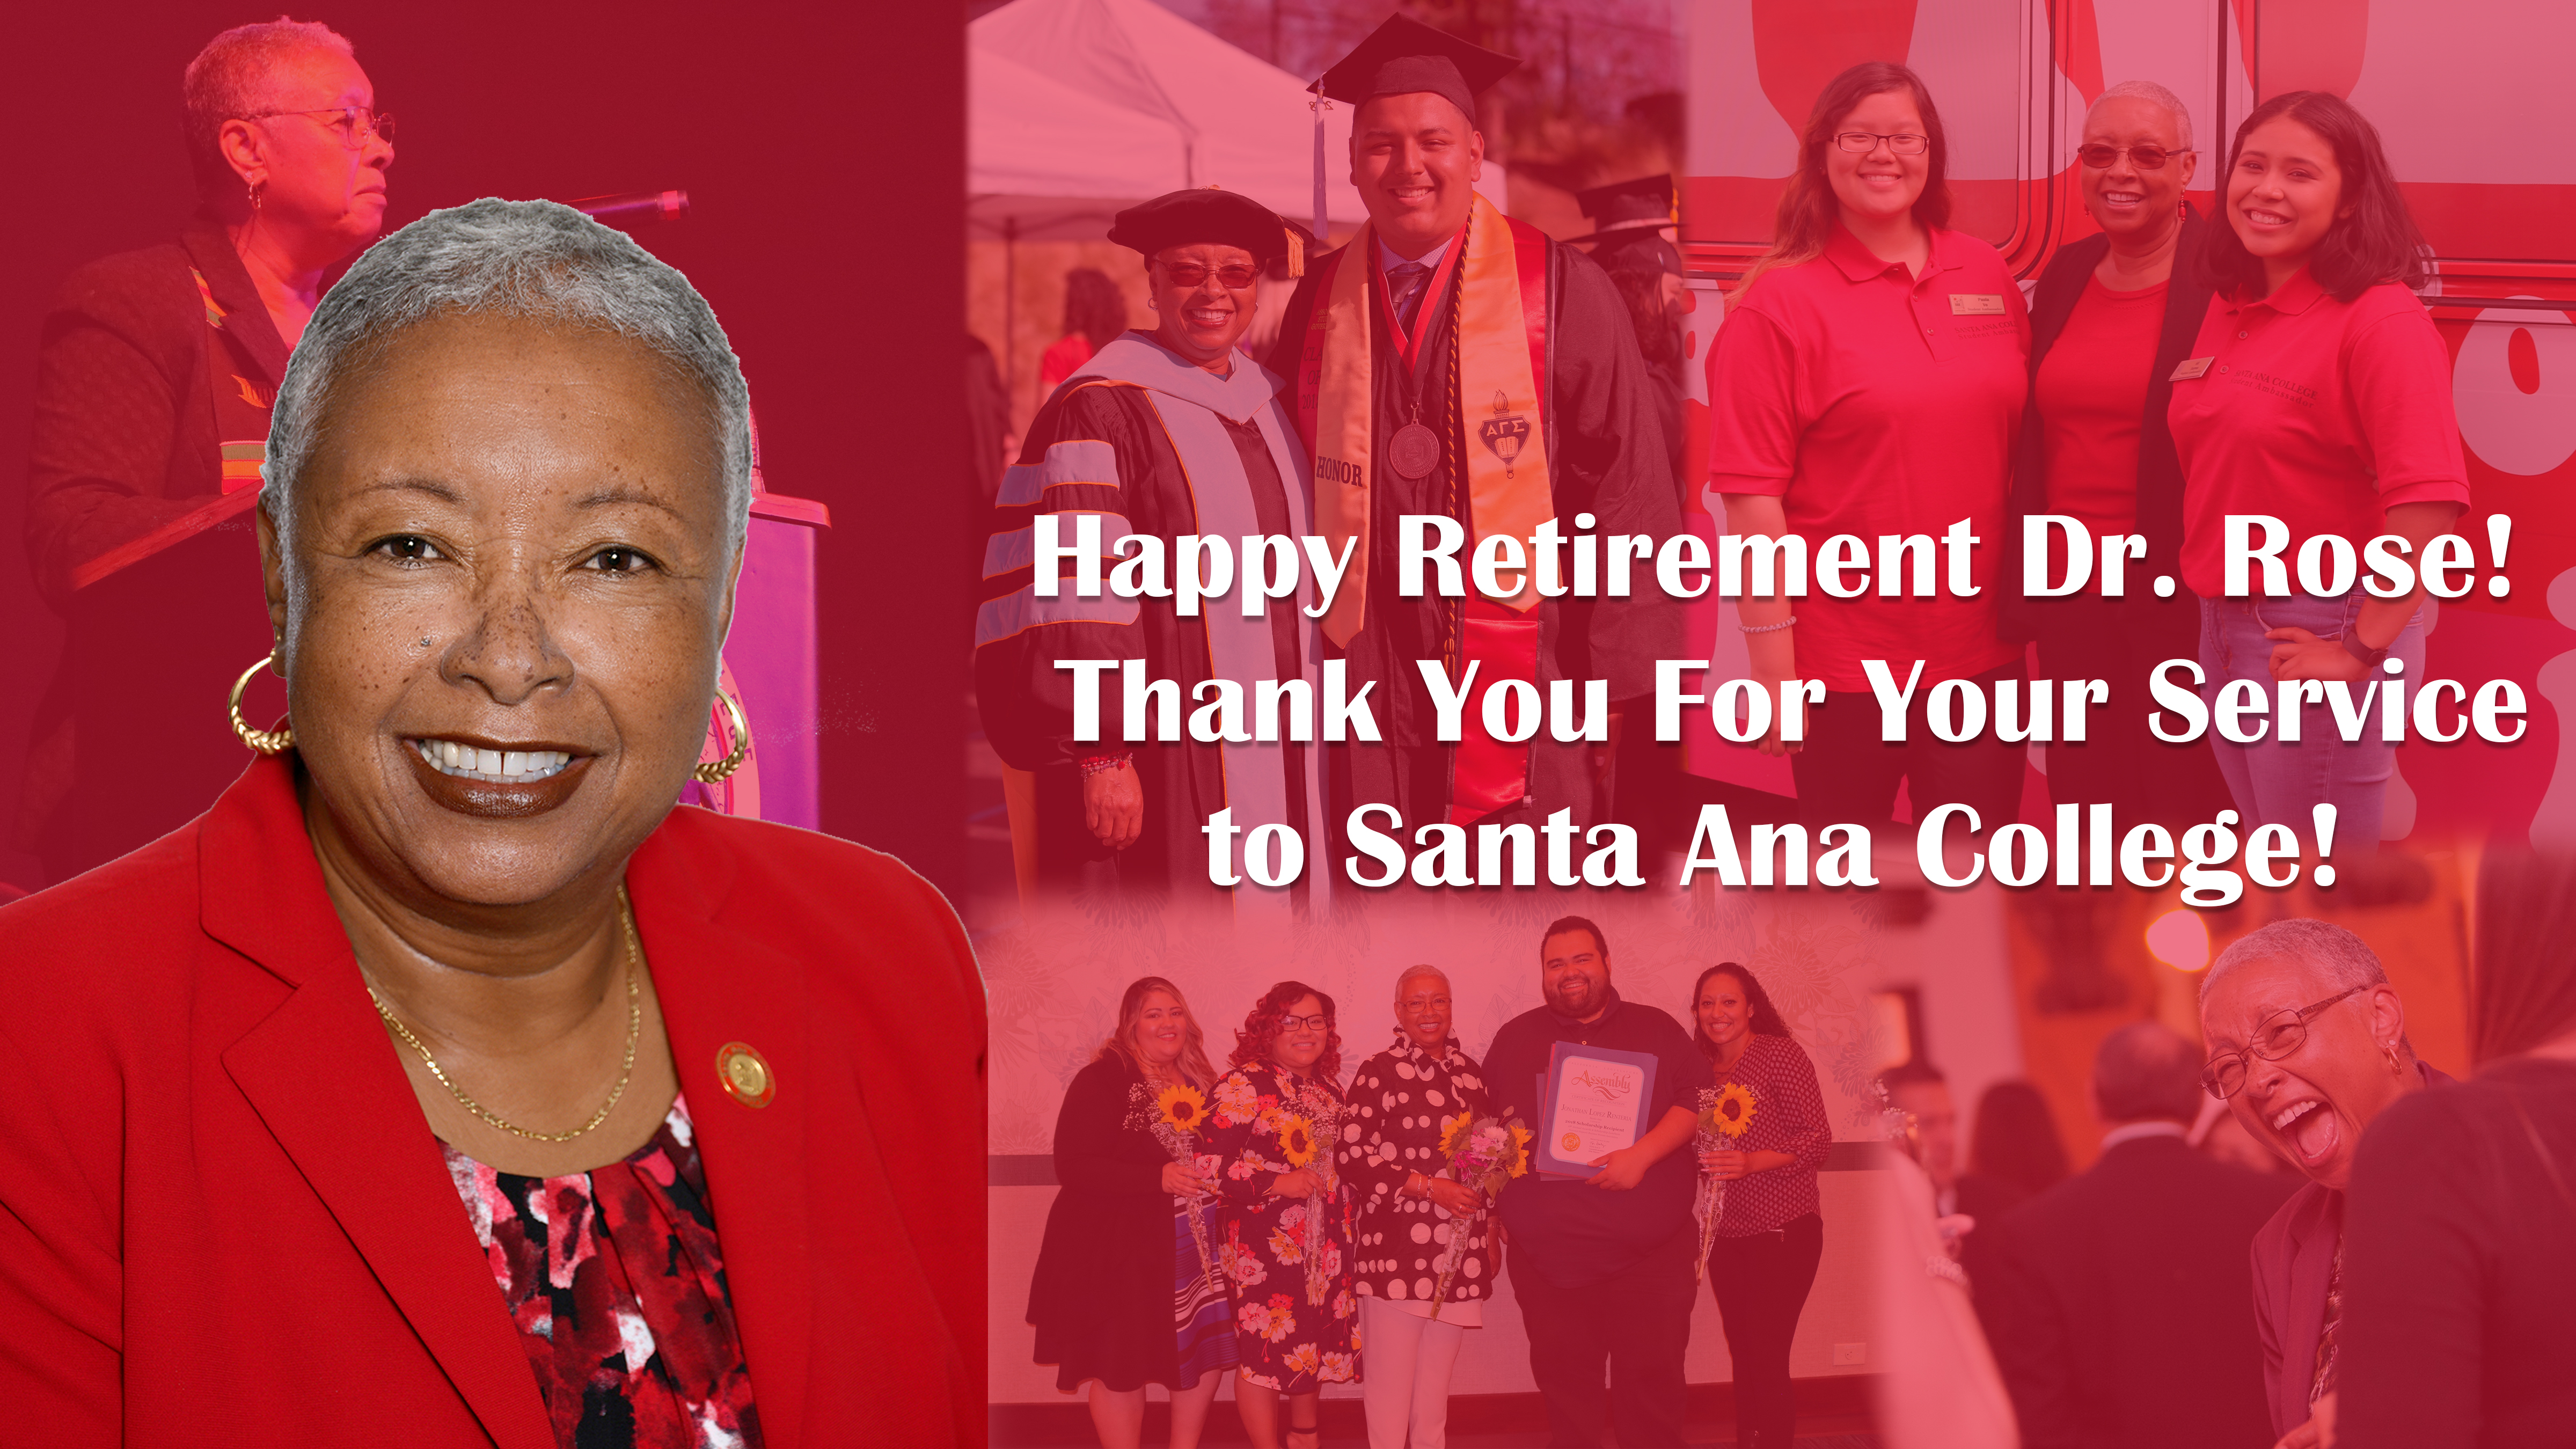 Happy Retirement Dr. Rose! Thank you for your service to Santa Ana College!